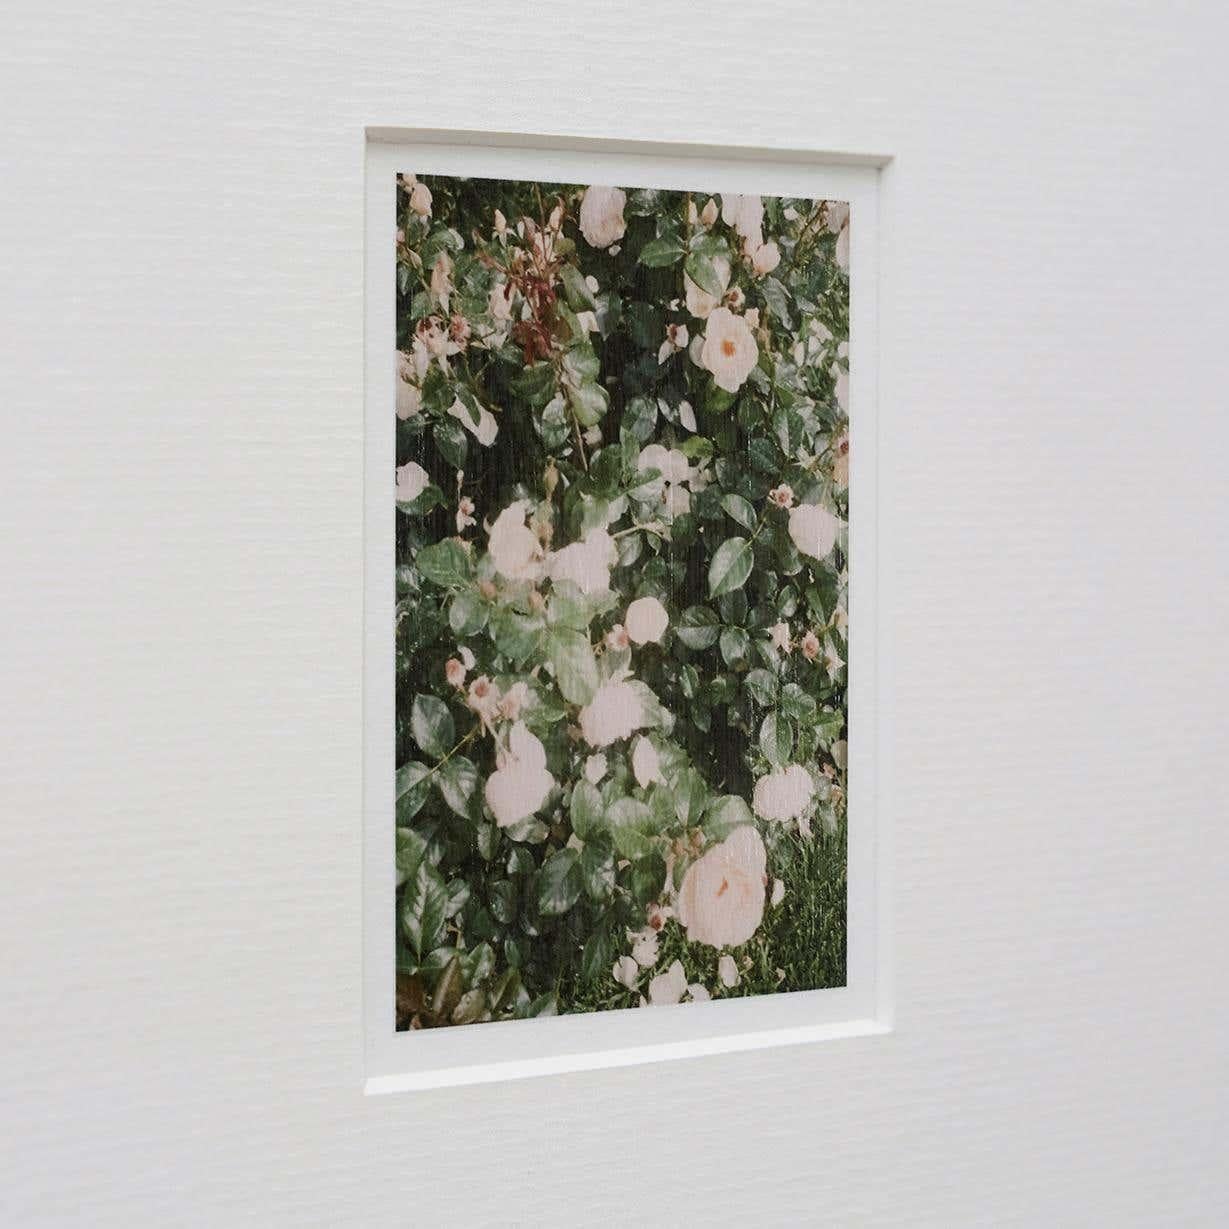 Paper David Urbano Contemporary Color Limited Edition Photography the Rose Garden N44 For Sale